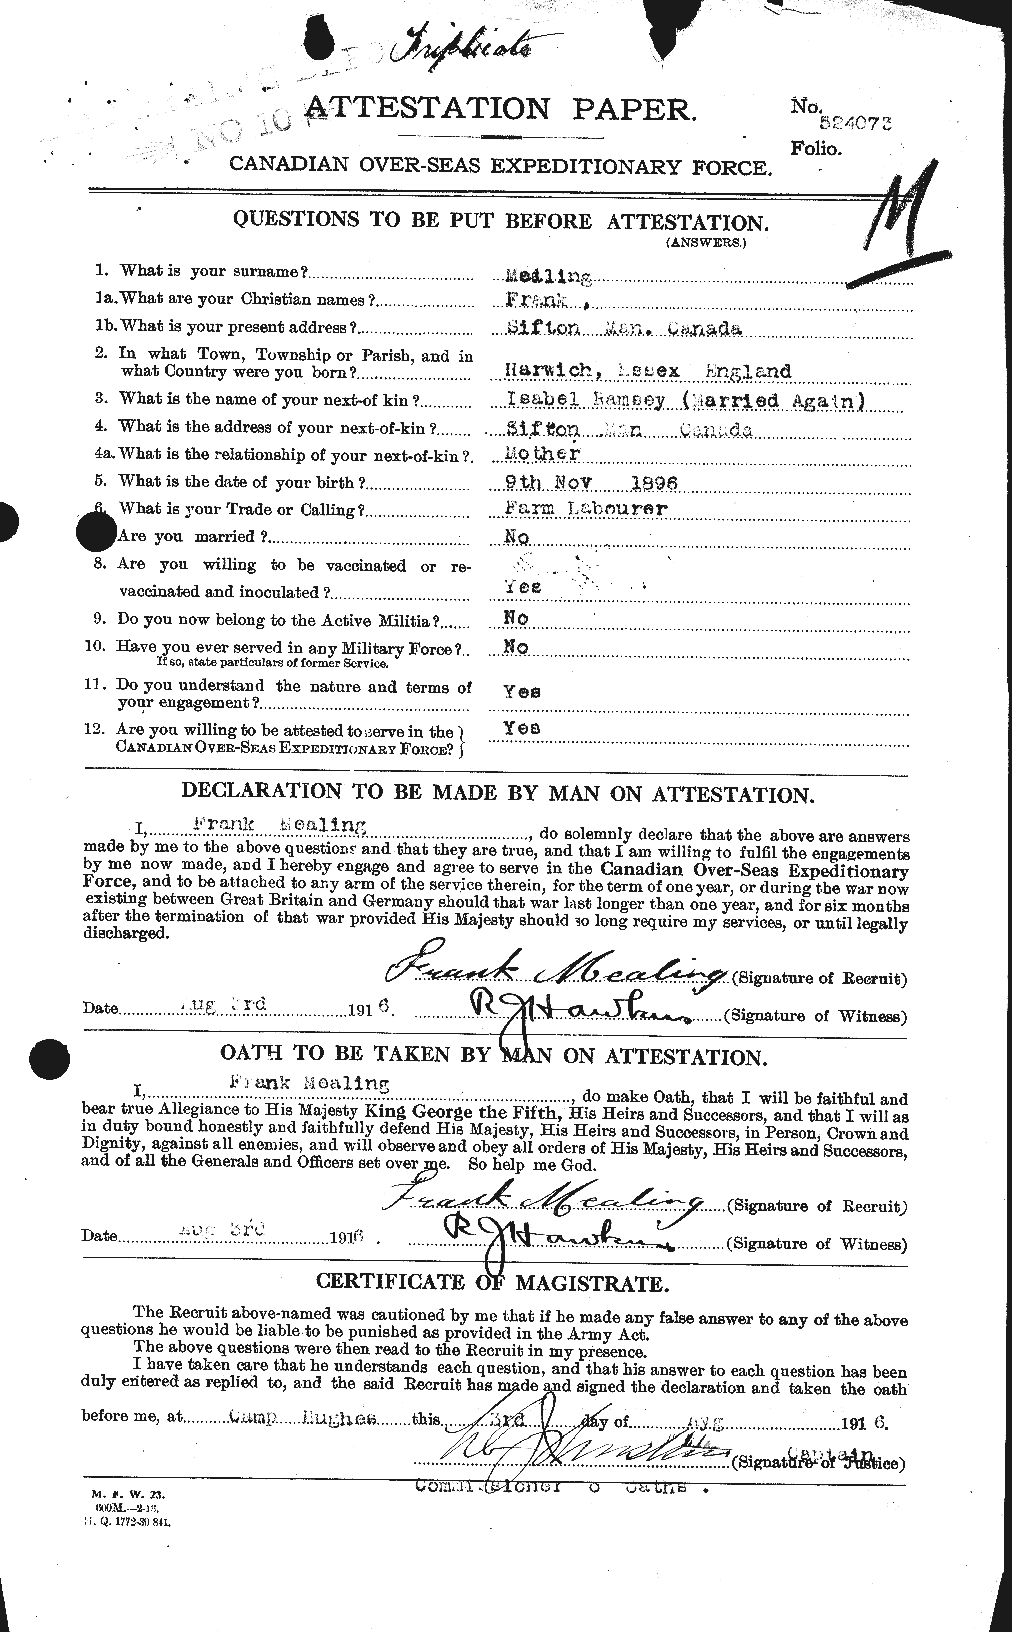 Personnel Records of the First World War - CEF 489622a